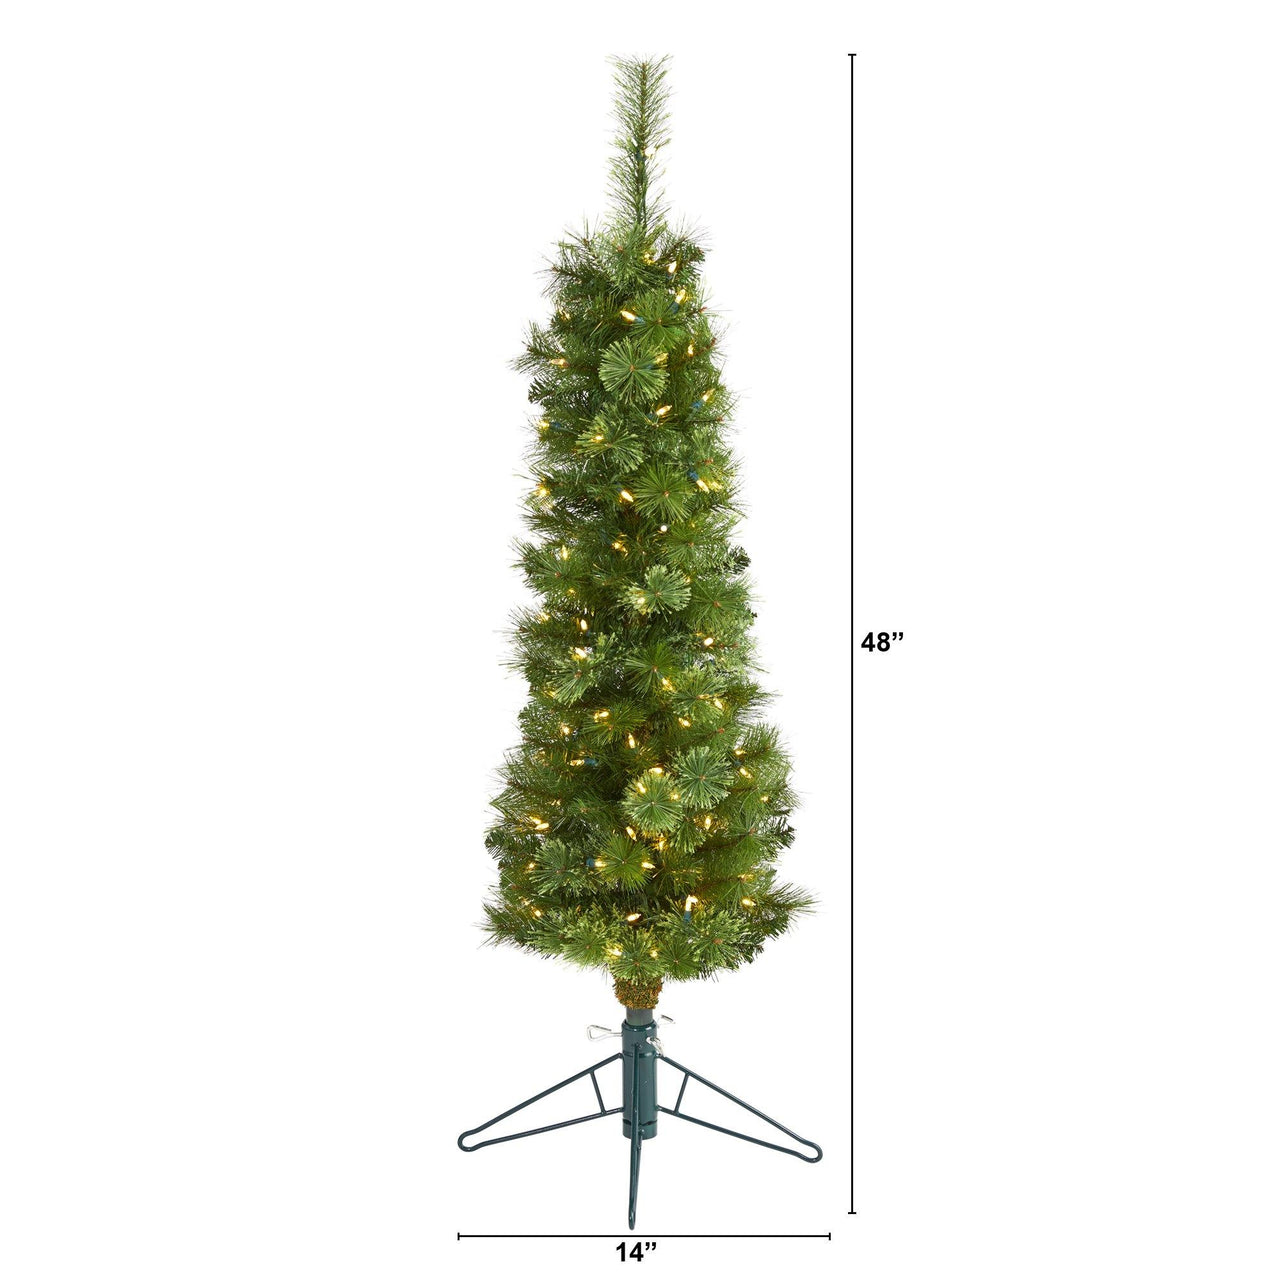 4' Green Pencil Artificial Christmas Tree with 100 Clear (Multifunction) LED Lights and 140 Bendable Branches - The Fox Decor